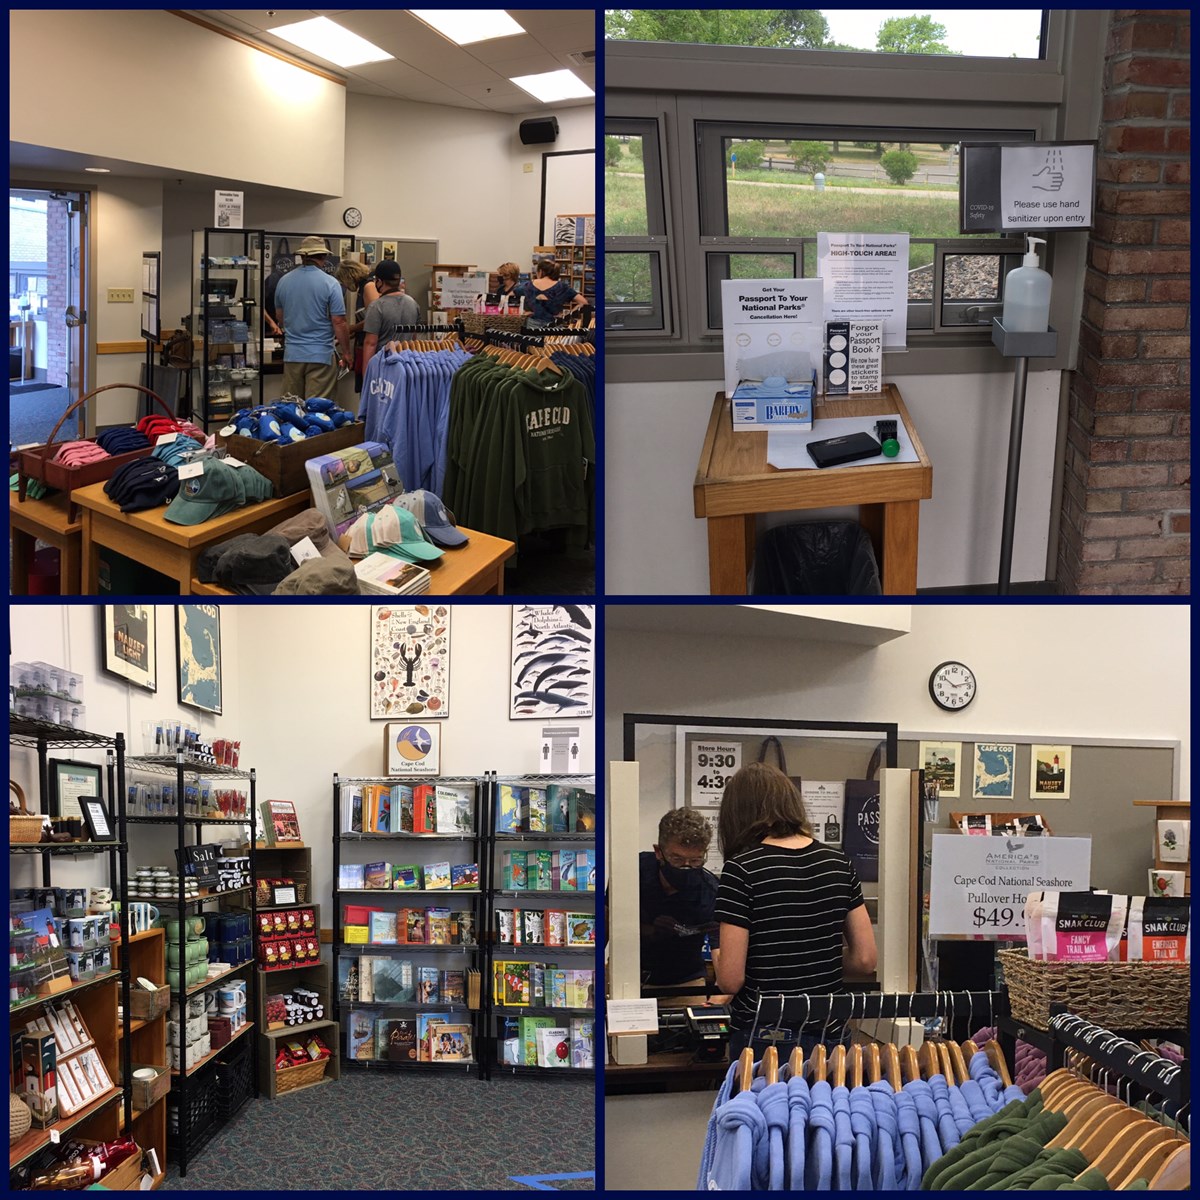 Collage of images showing a book and gift store with national seashore items